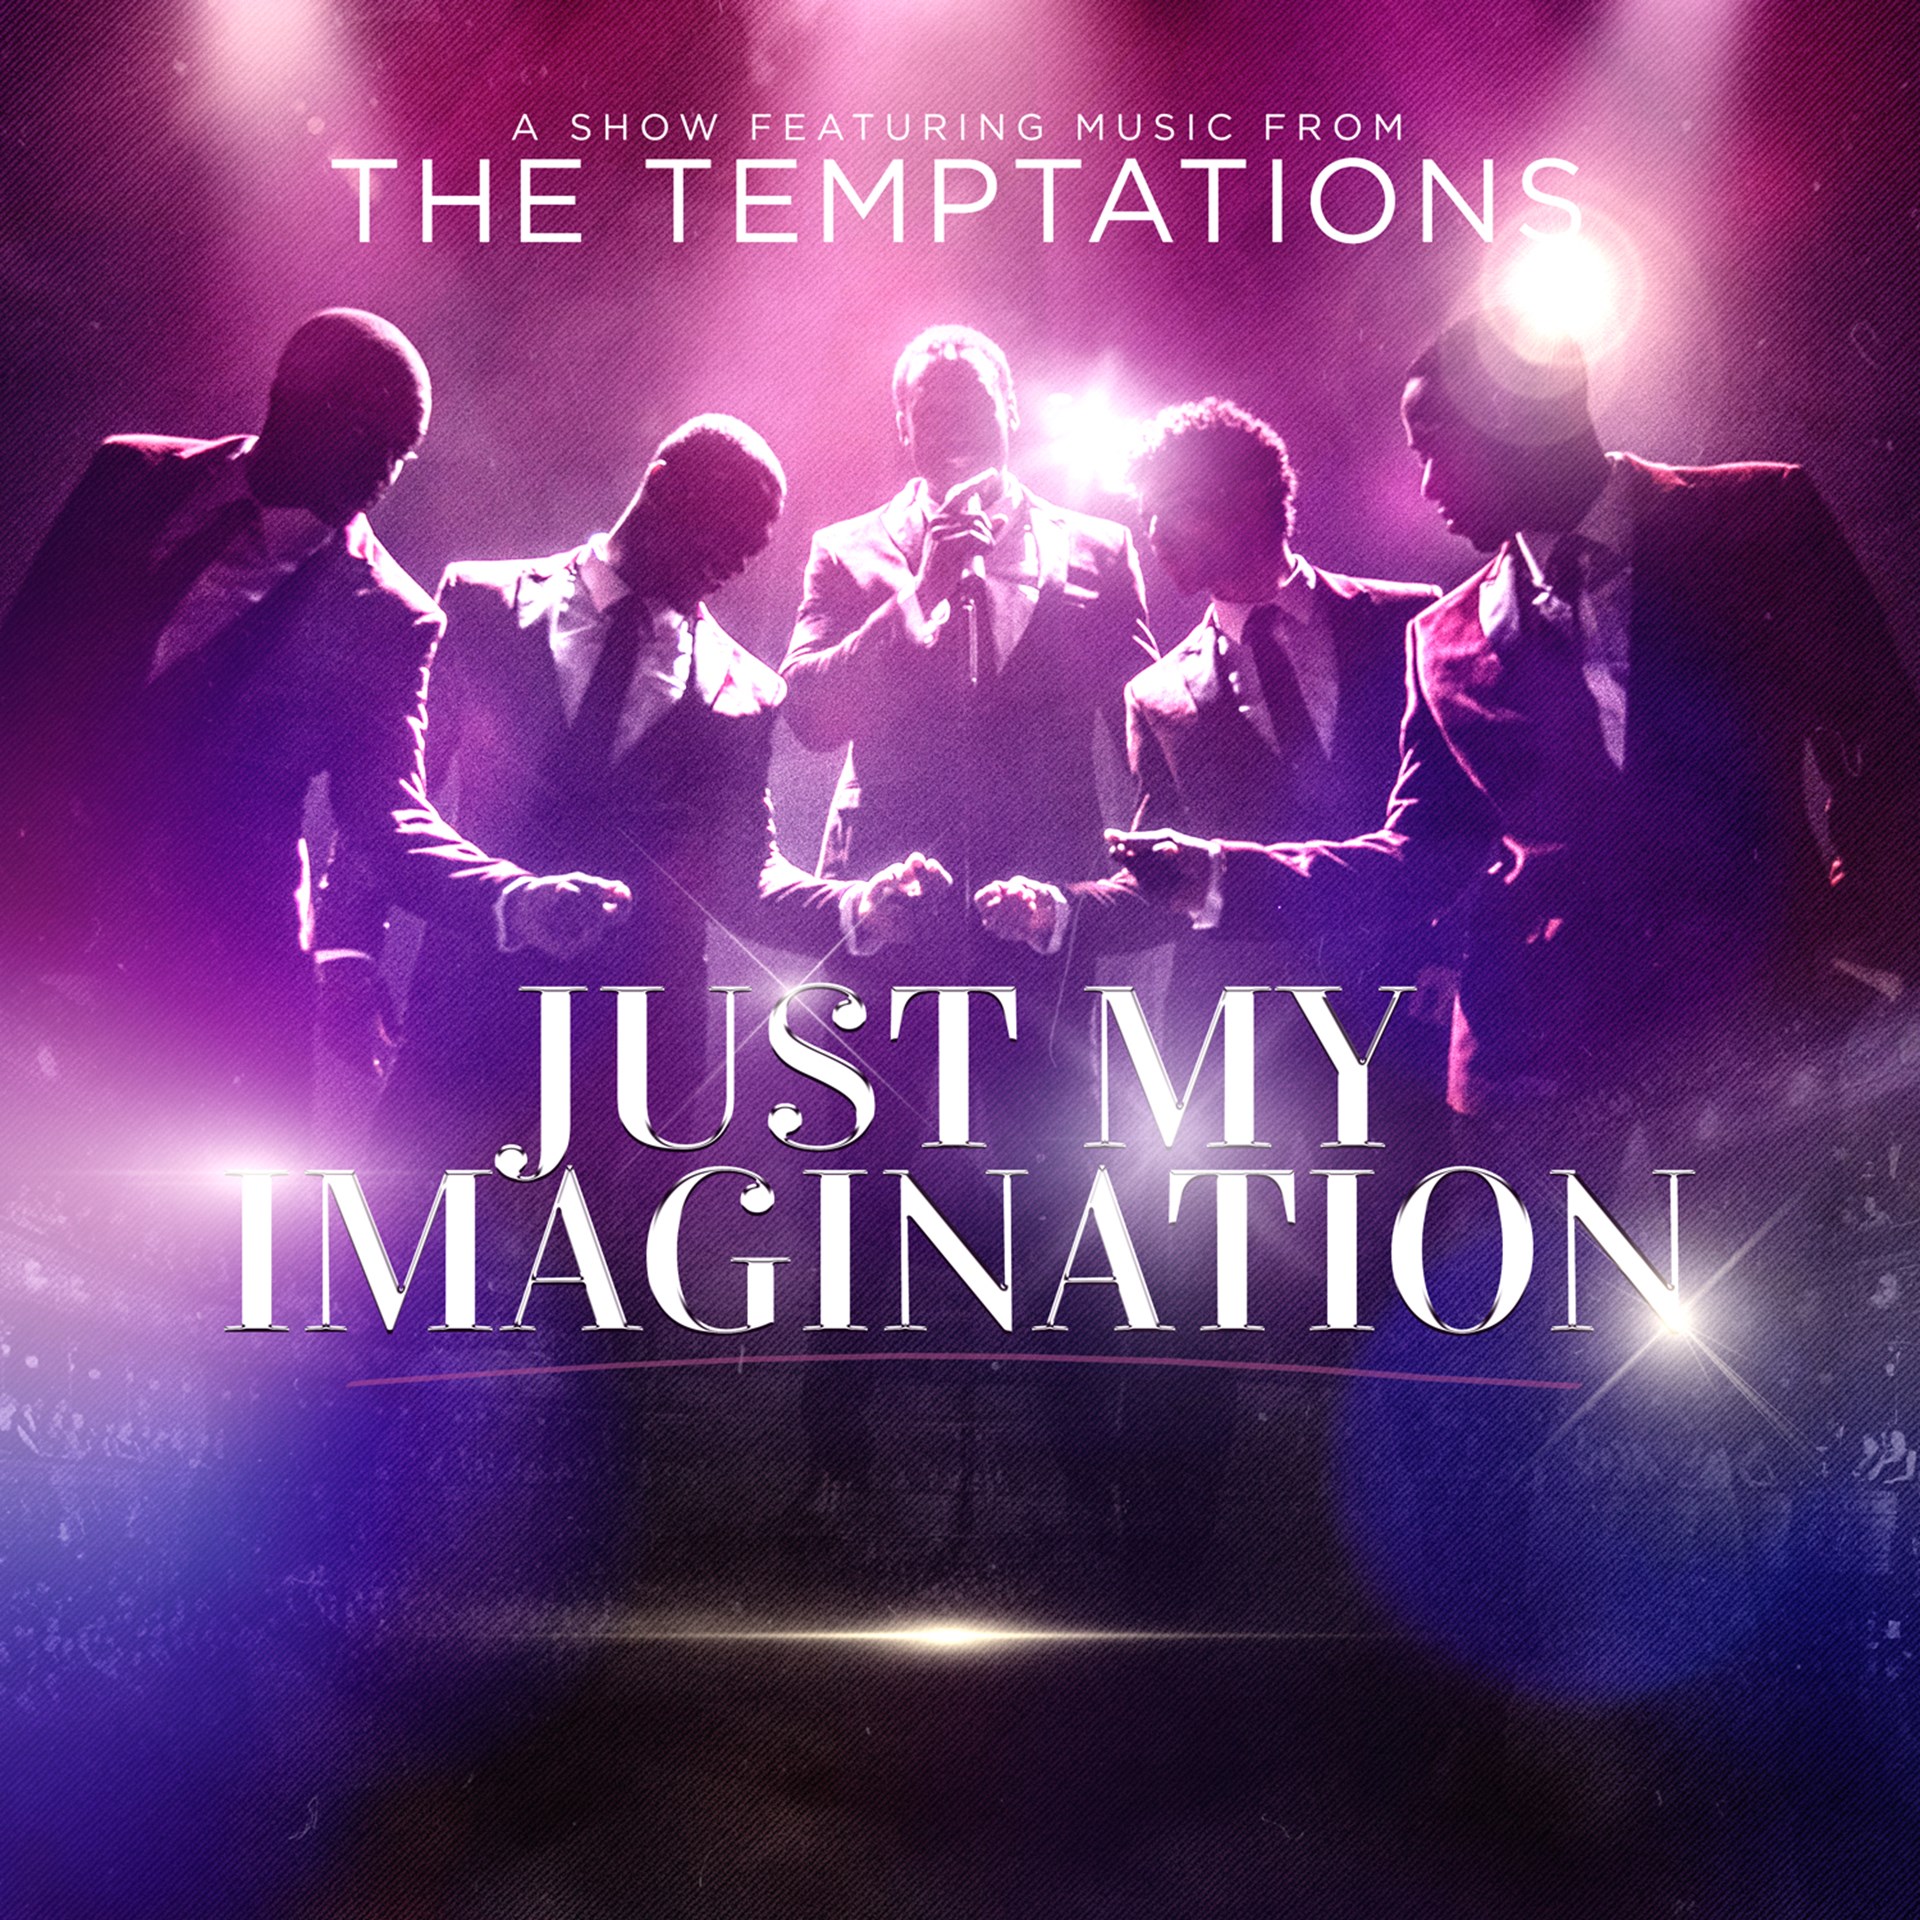 https://www.thecapitolhorsham.com/media/8251/1500x1500_image_title_only_temptations_2021.jpg?anchor=center&mode=crop&width=1920&height=1920&rnd=133416775130000000